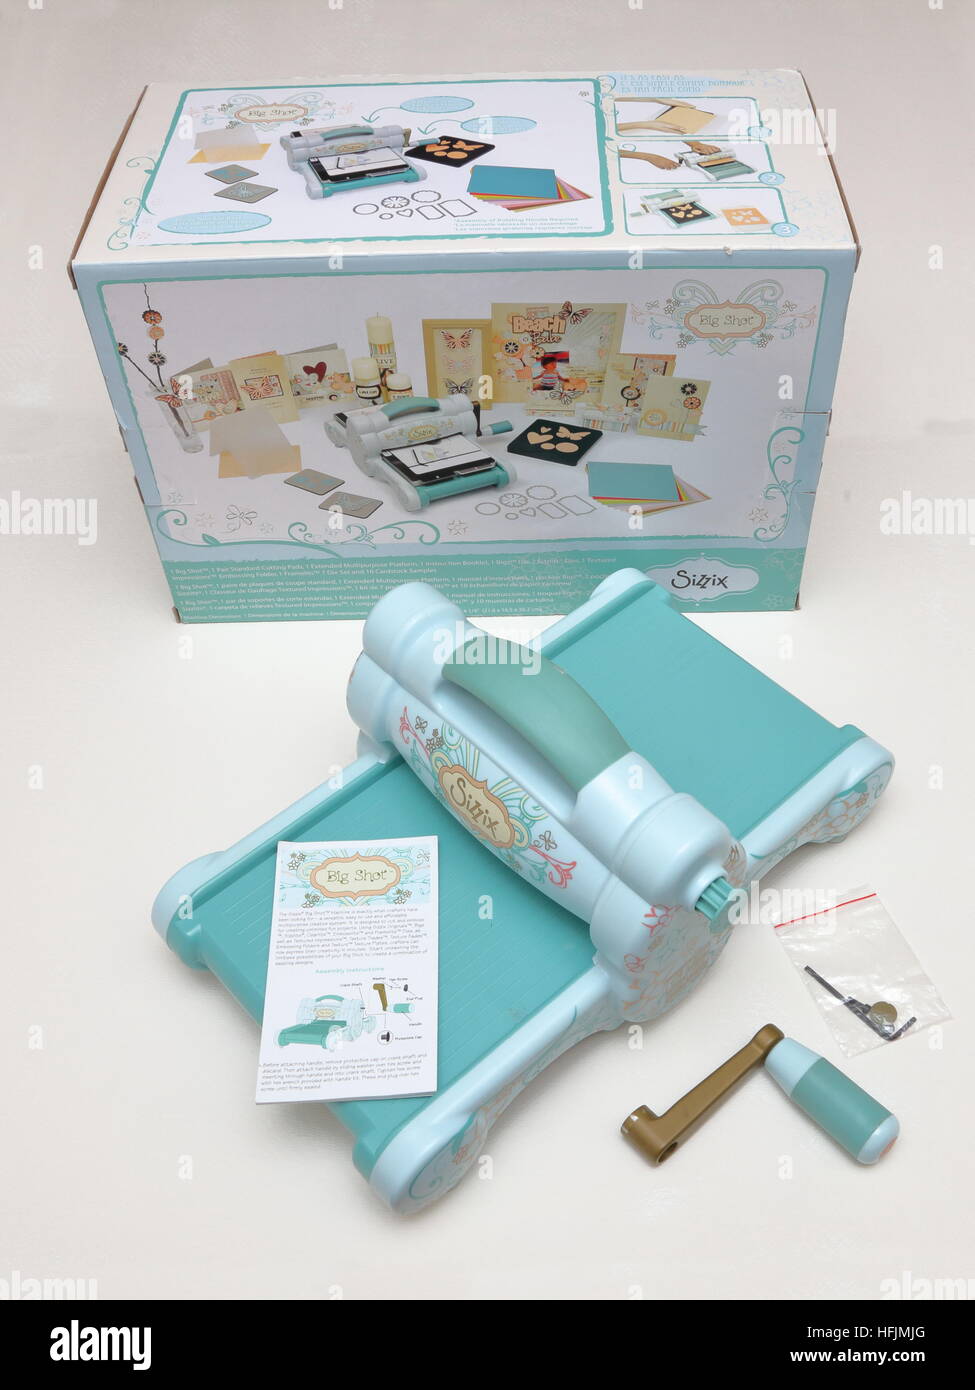 Sizzix Big Shot craft tool for embossing and cutting card and paper Stock  Photo - Alamy